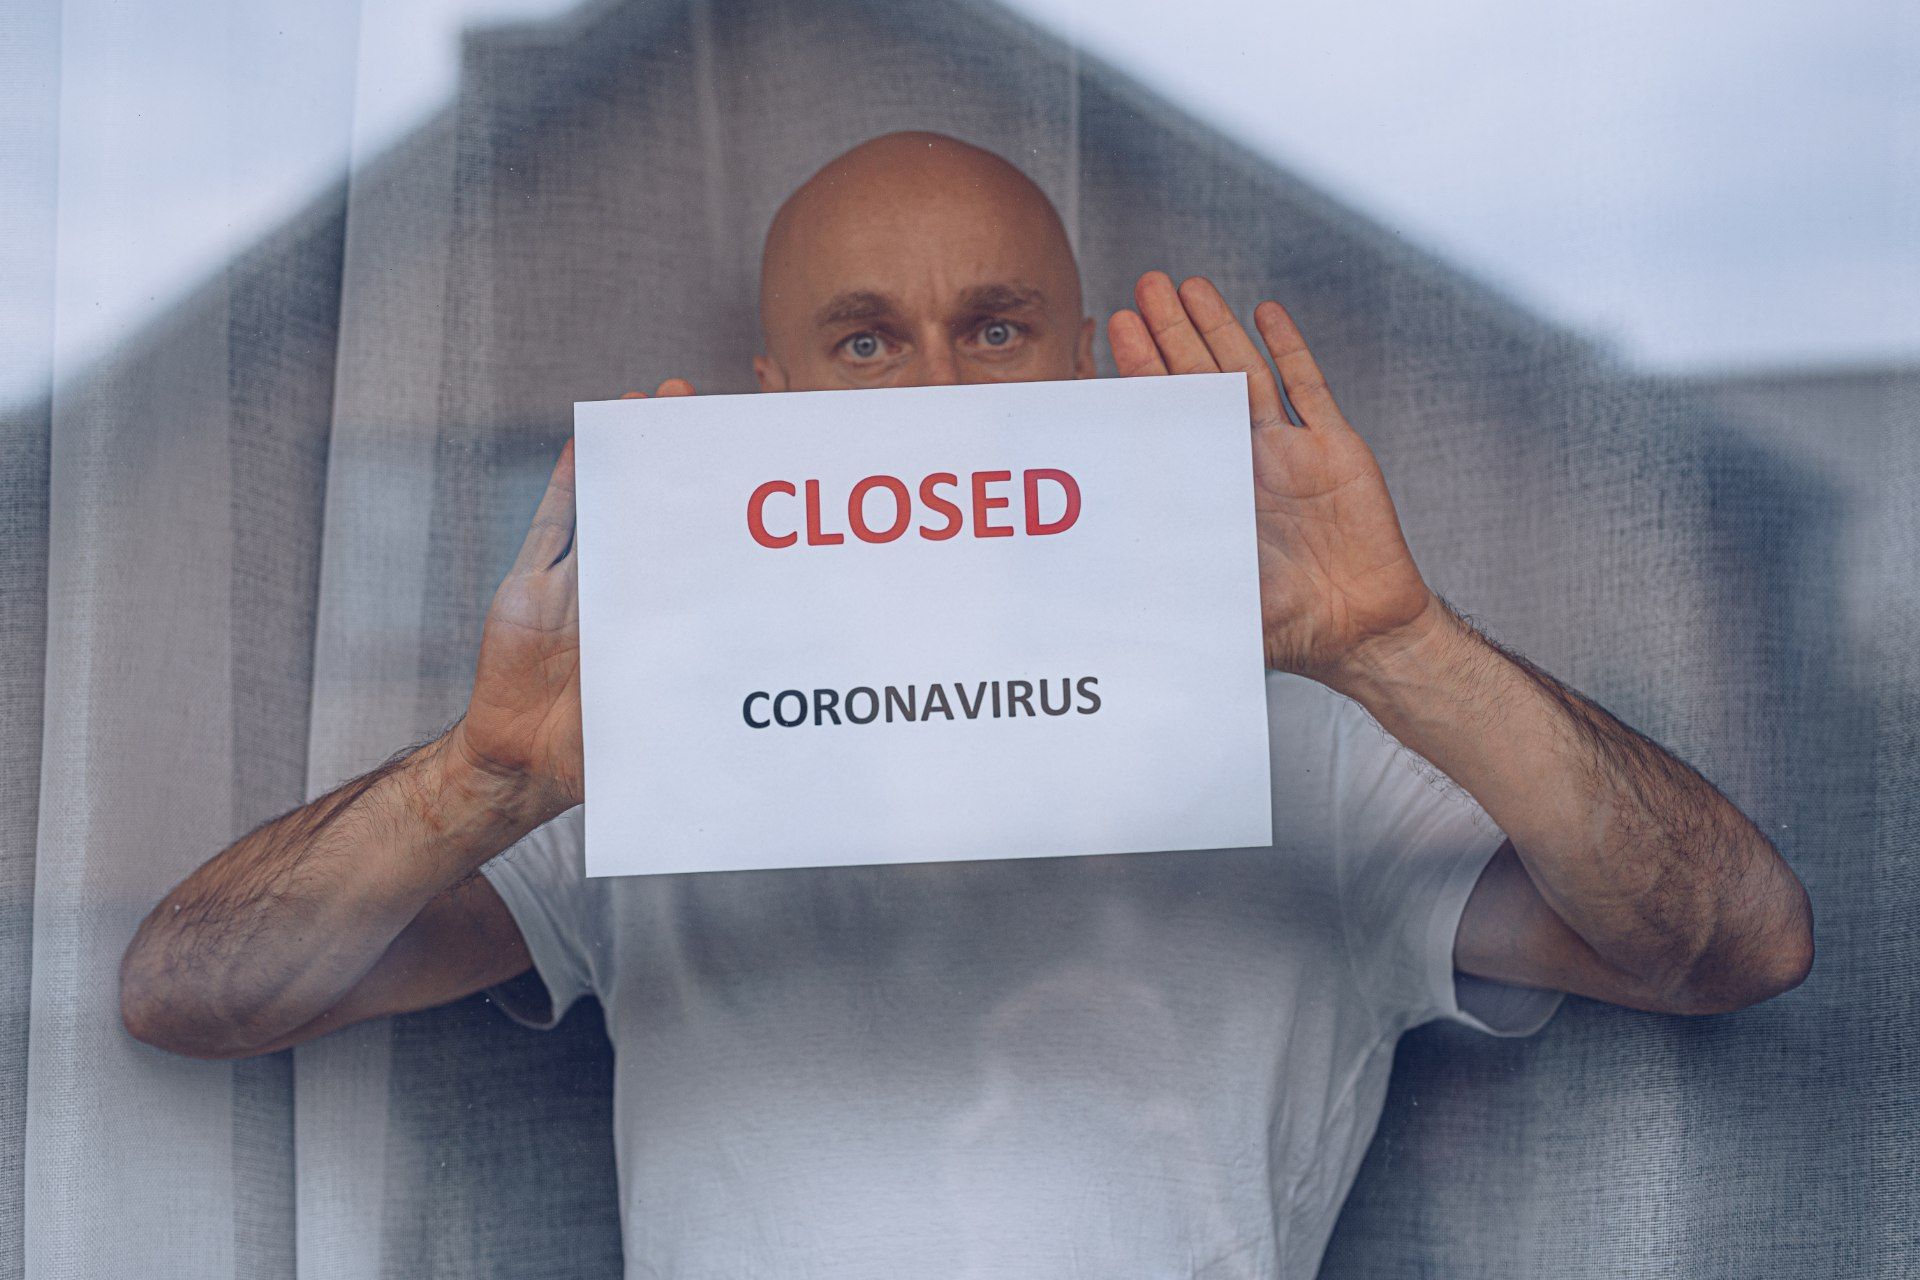 Man standing in window with paper that reads "CLOSED CORONAVIRUS"